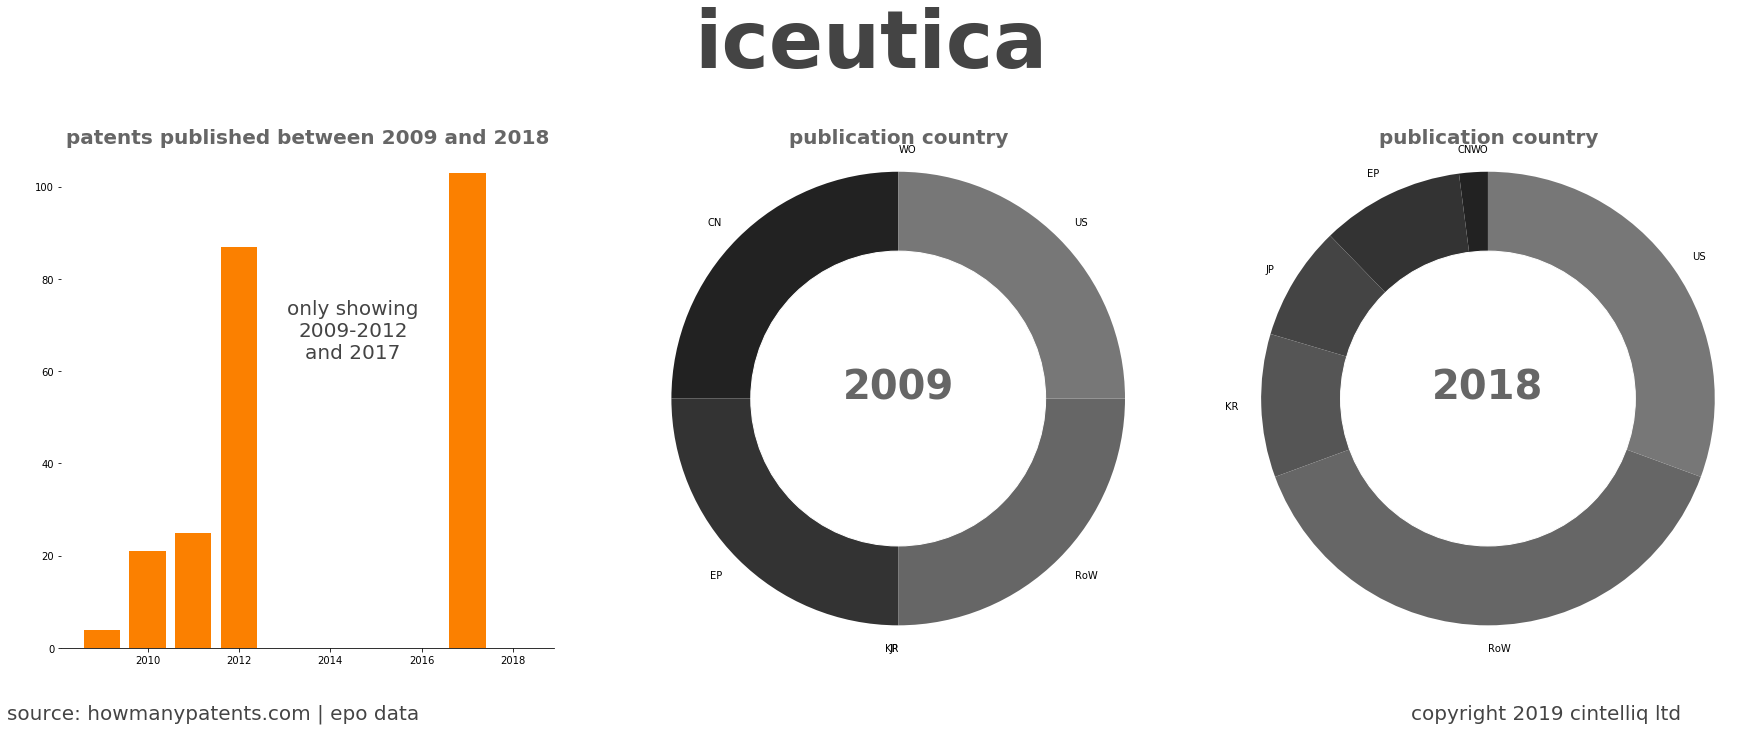 summary of patents for Iceutica